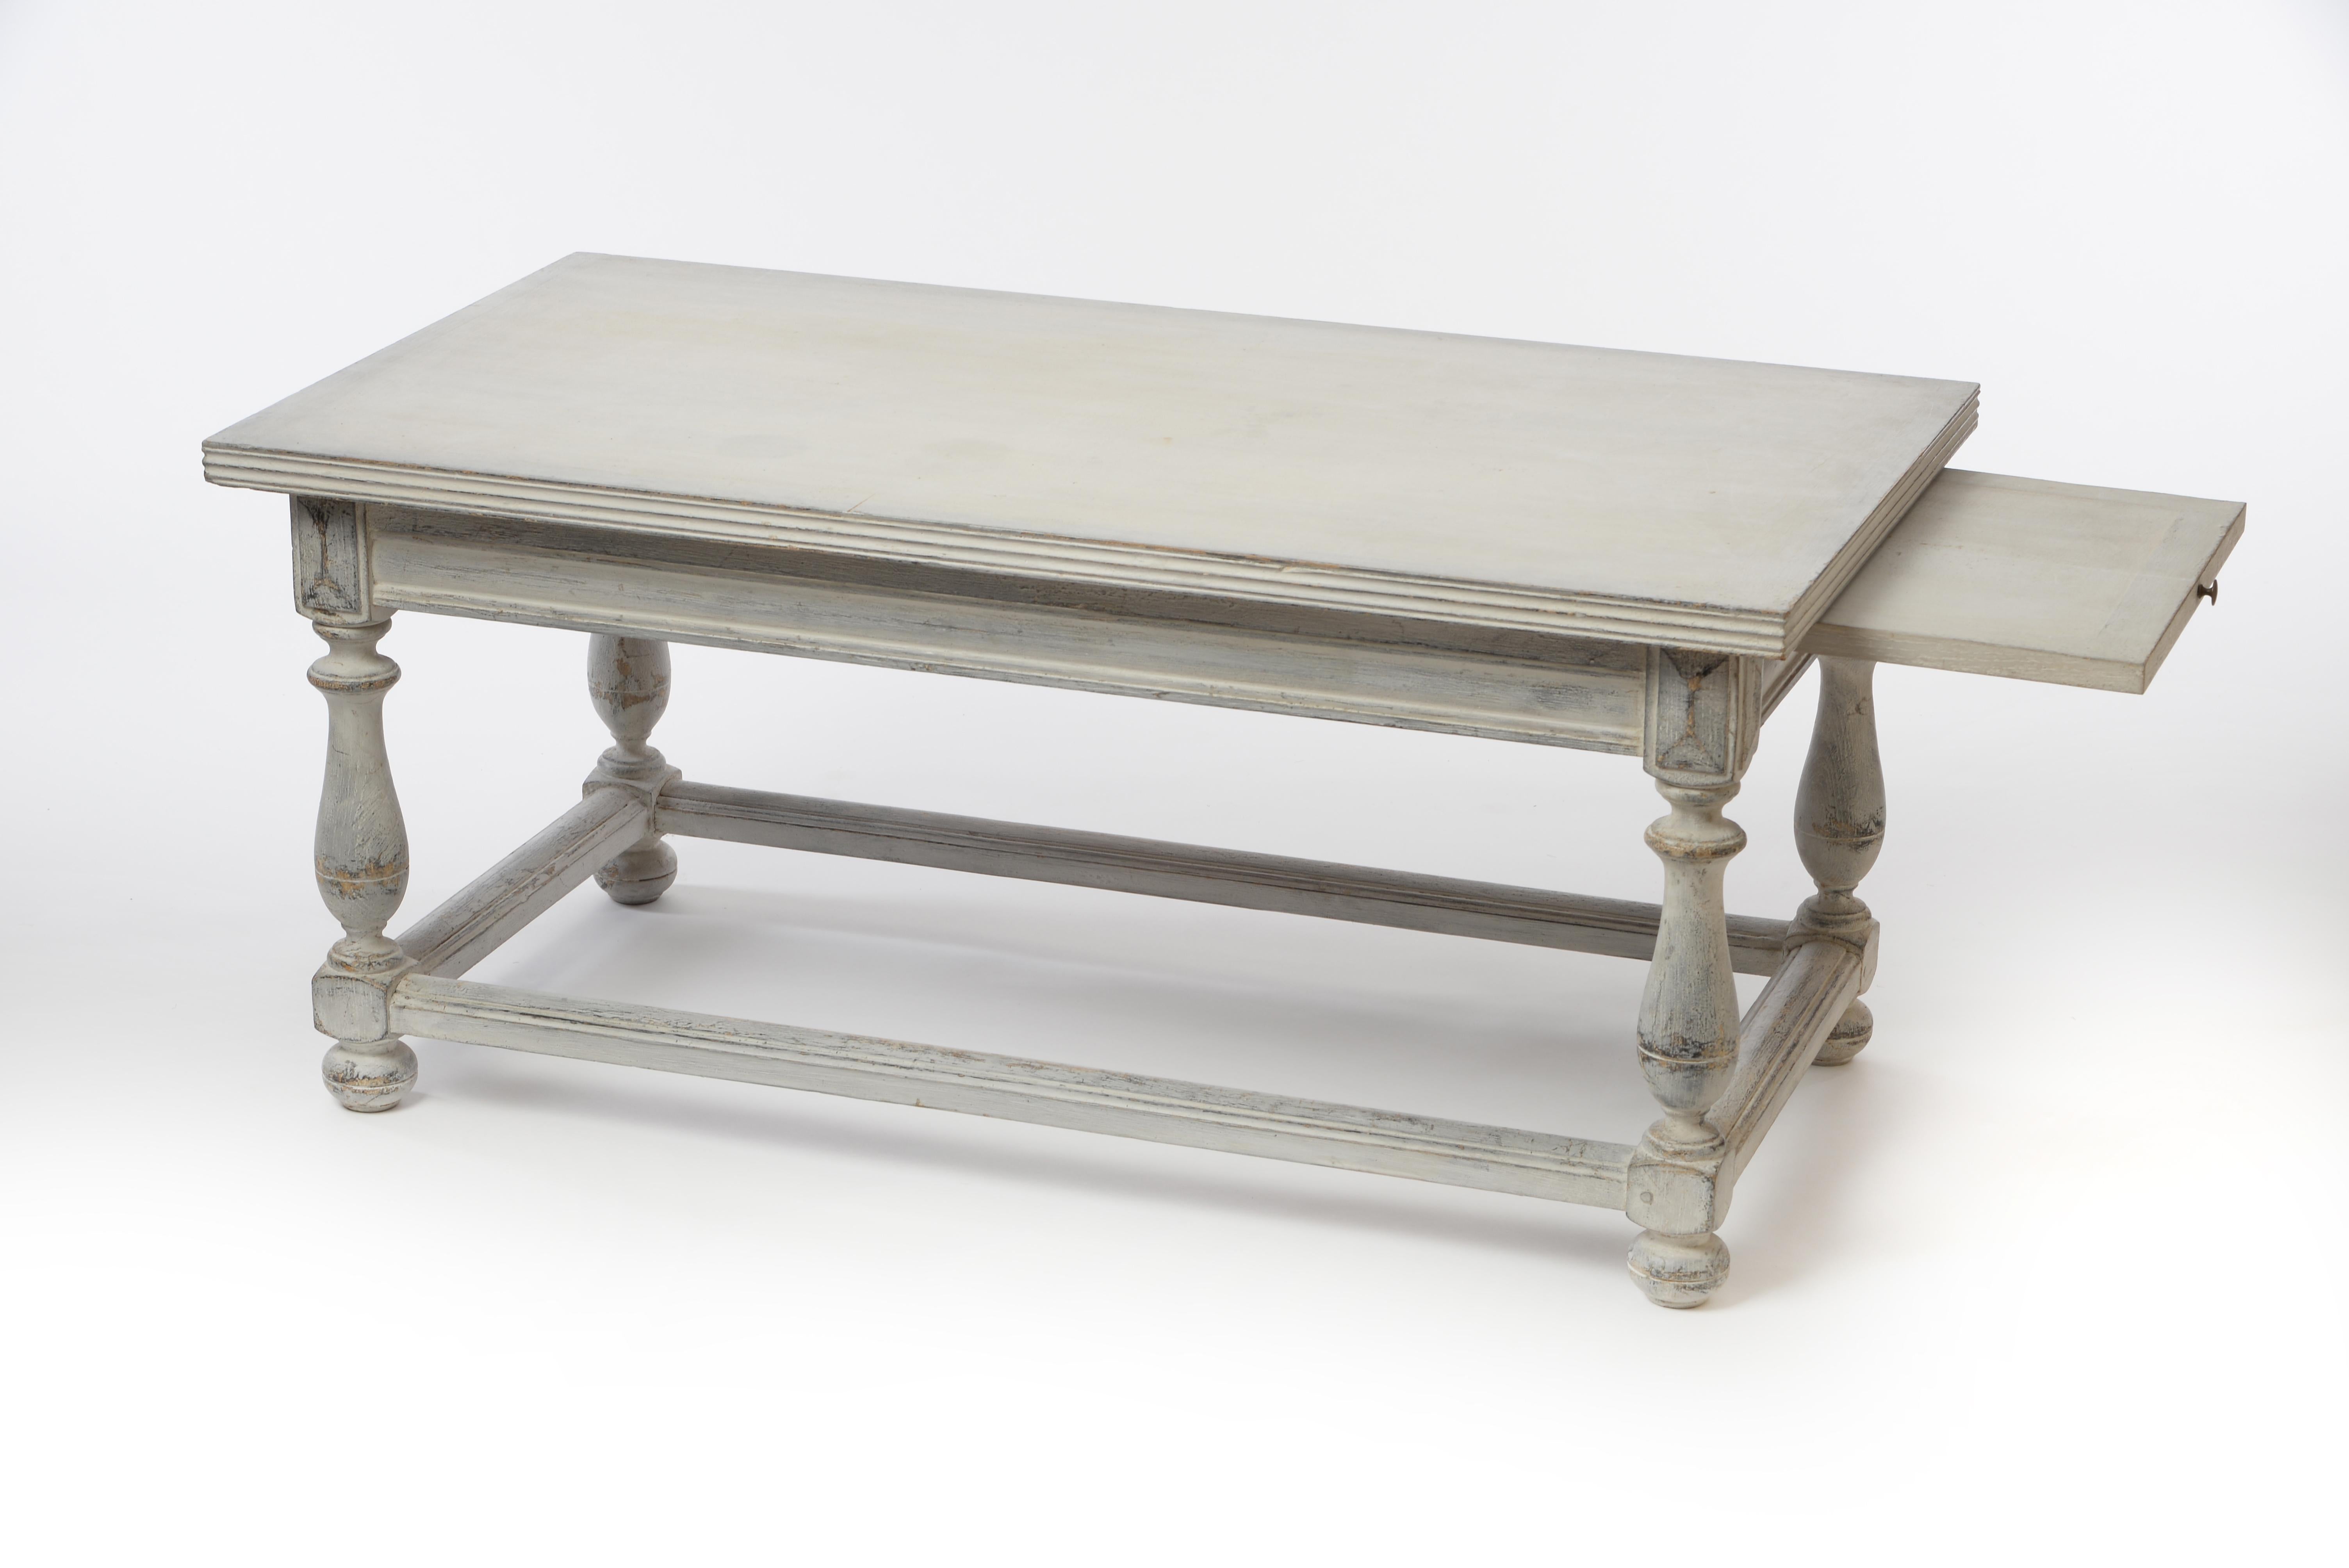 This exceptional Gustavian coffee table from the 18th century features not only interesting legs with an all-around footrest but also practical pullout extensions on each side perfect for placing an extra drink. The table is in good condition and